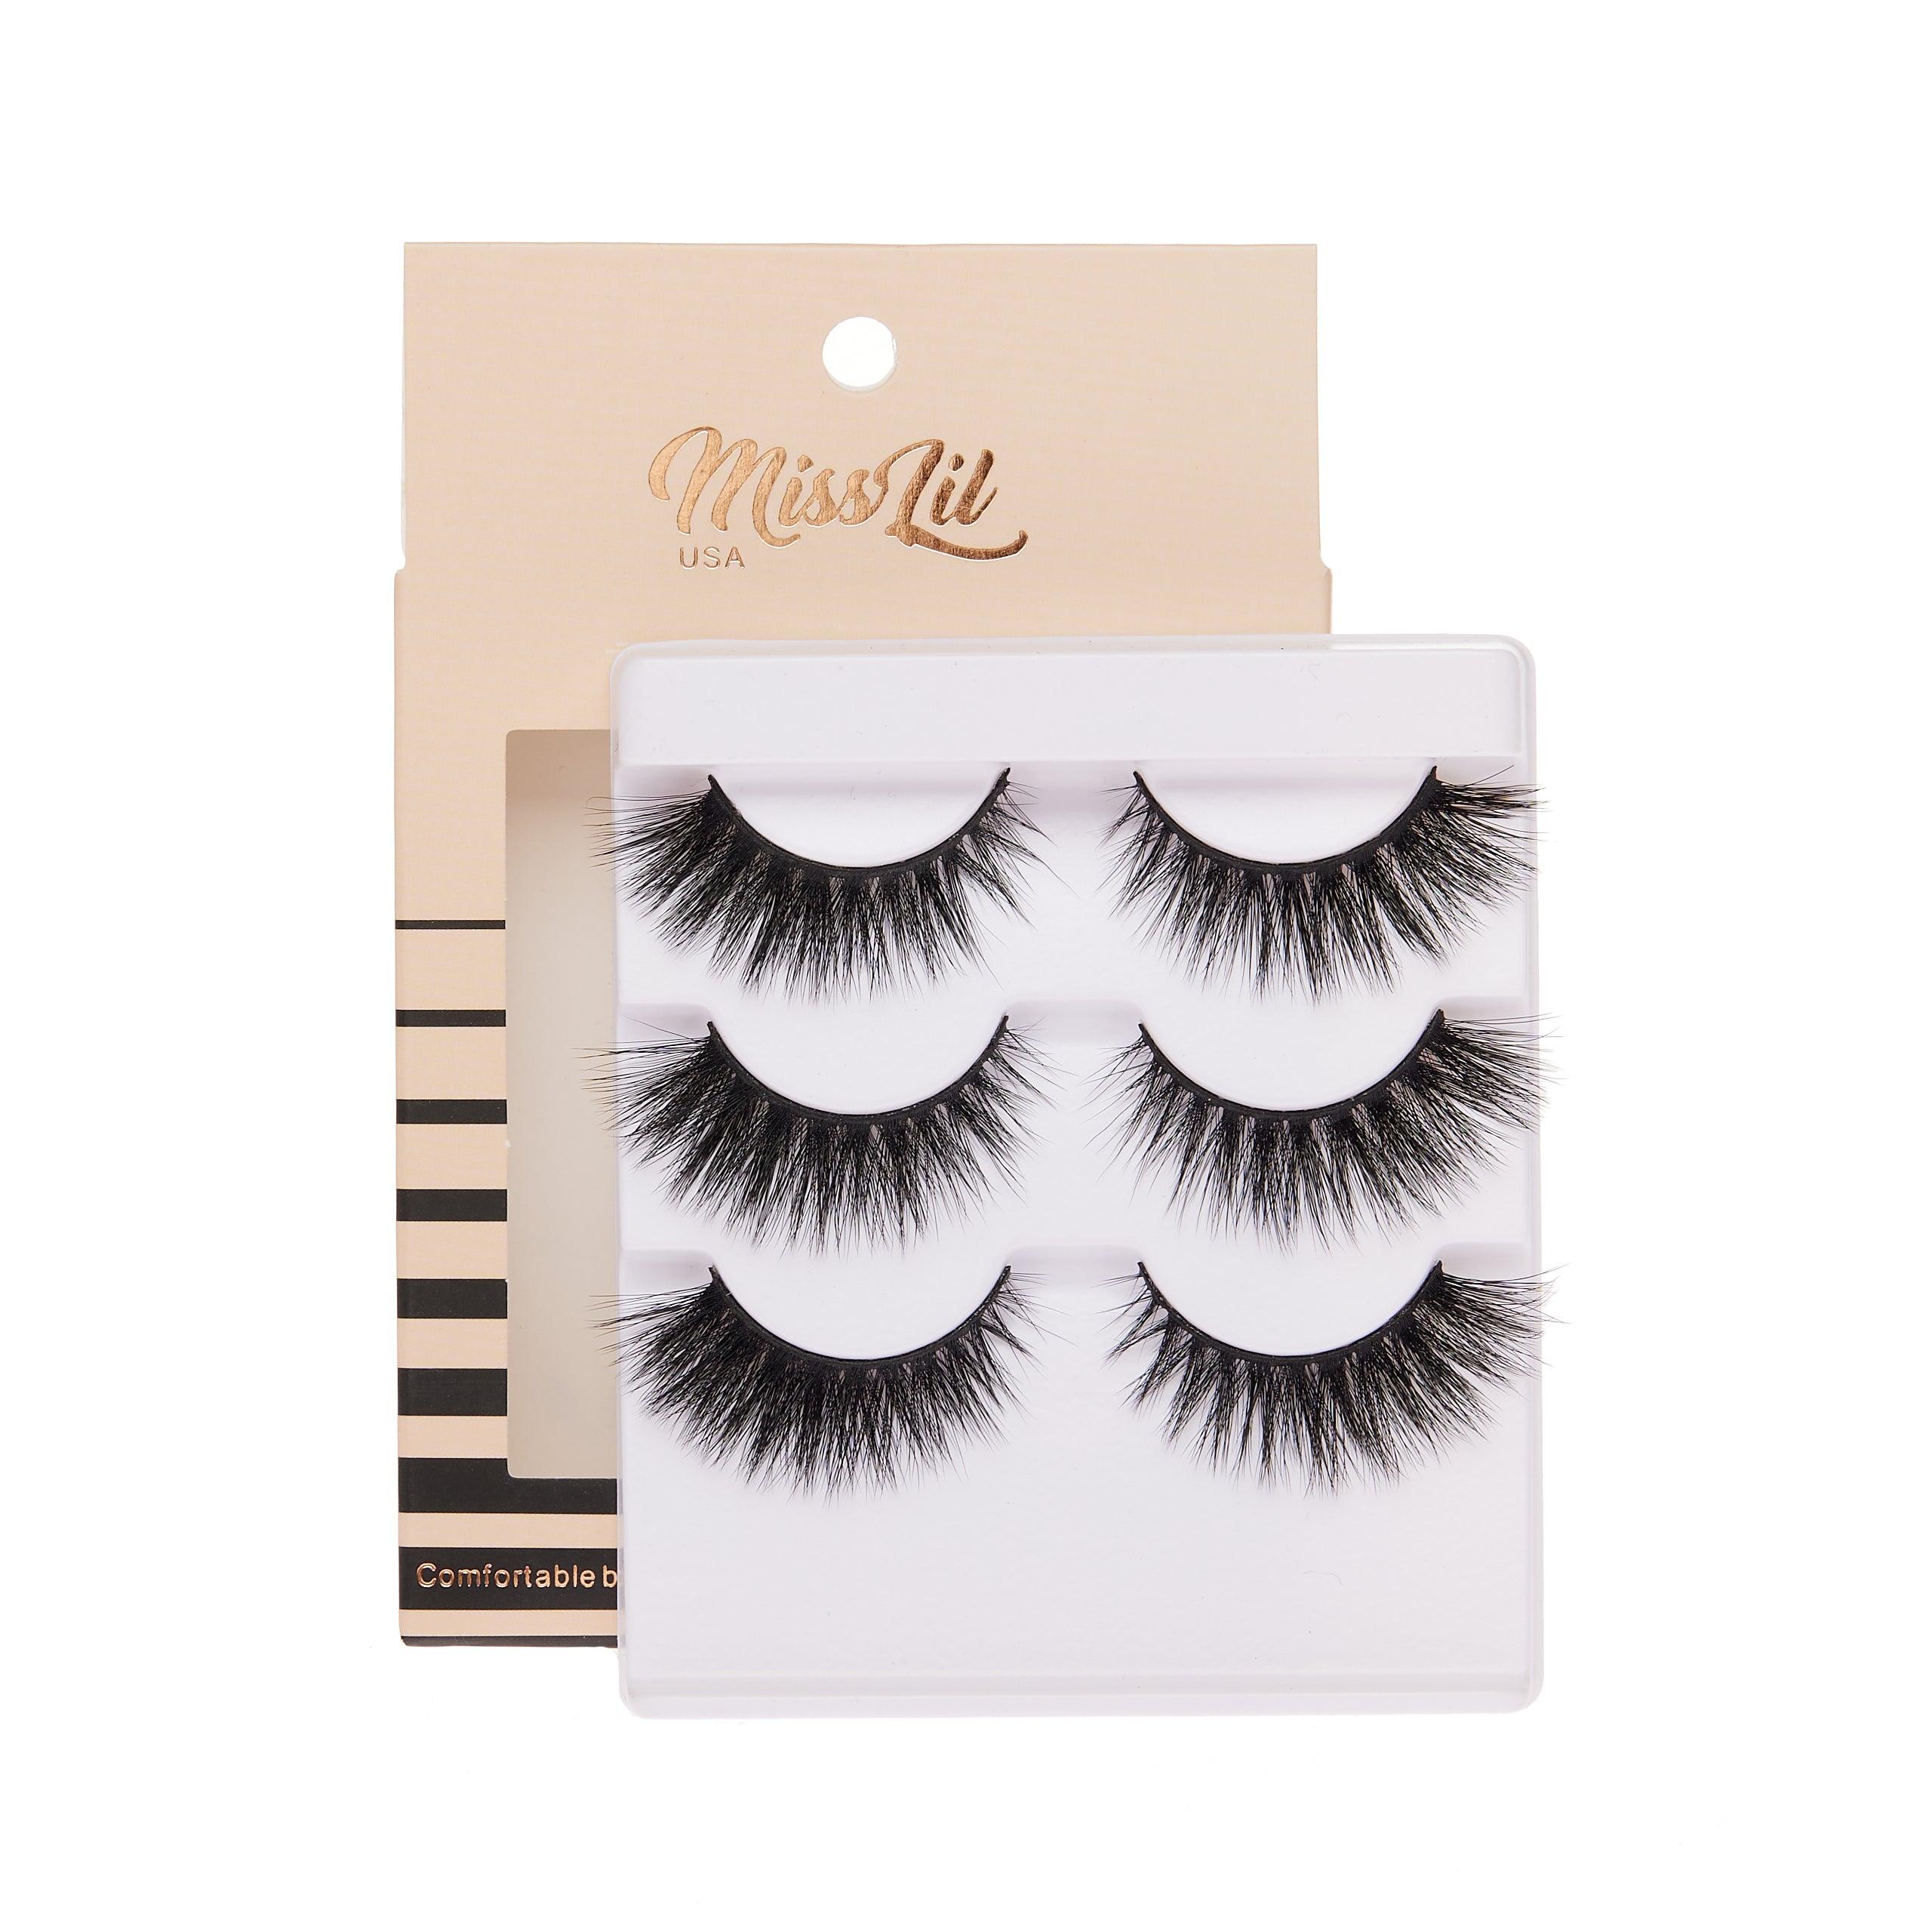 3-Pair Faux 9D Mink Eyelashes - Luxury Collection #23 - Pack of 3 - Miss Lil USA